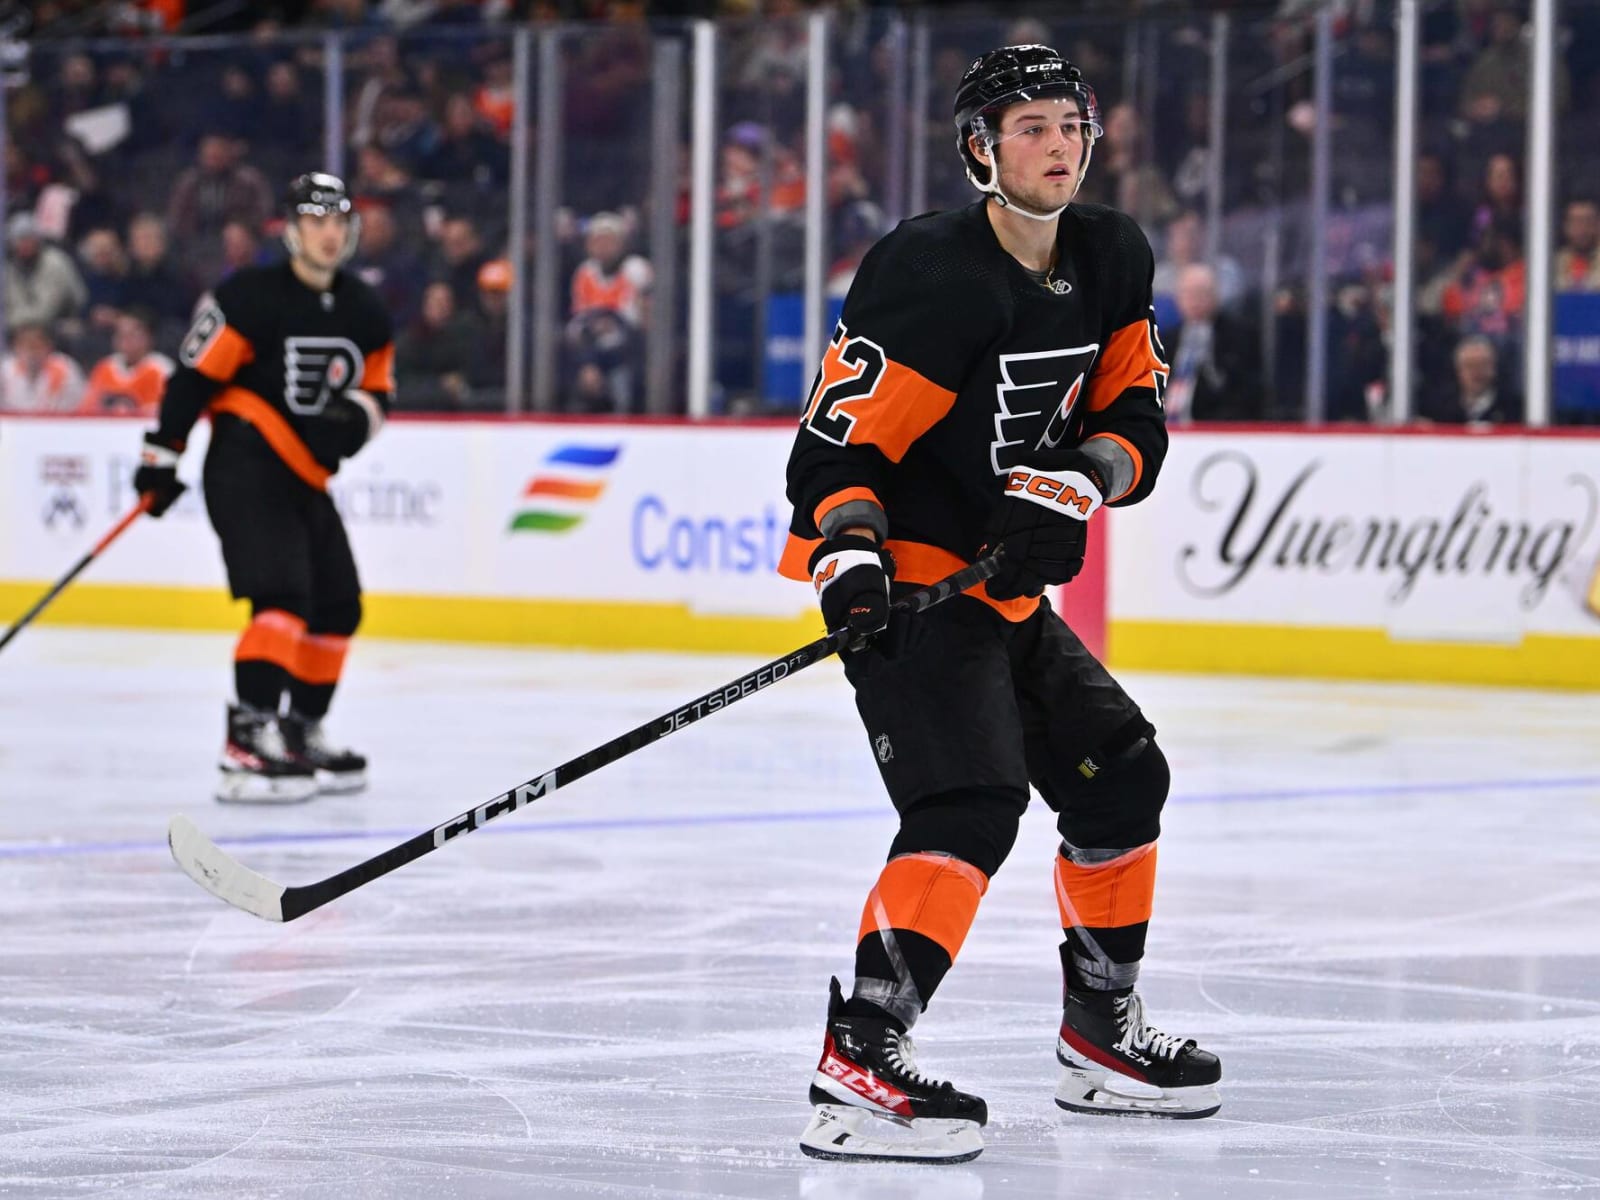 Cal O'Reilly Re-Signs with Phantoms - Lehigh Valley Phantoms